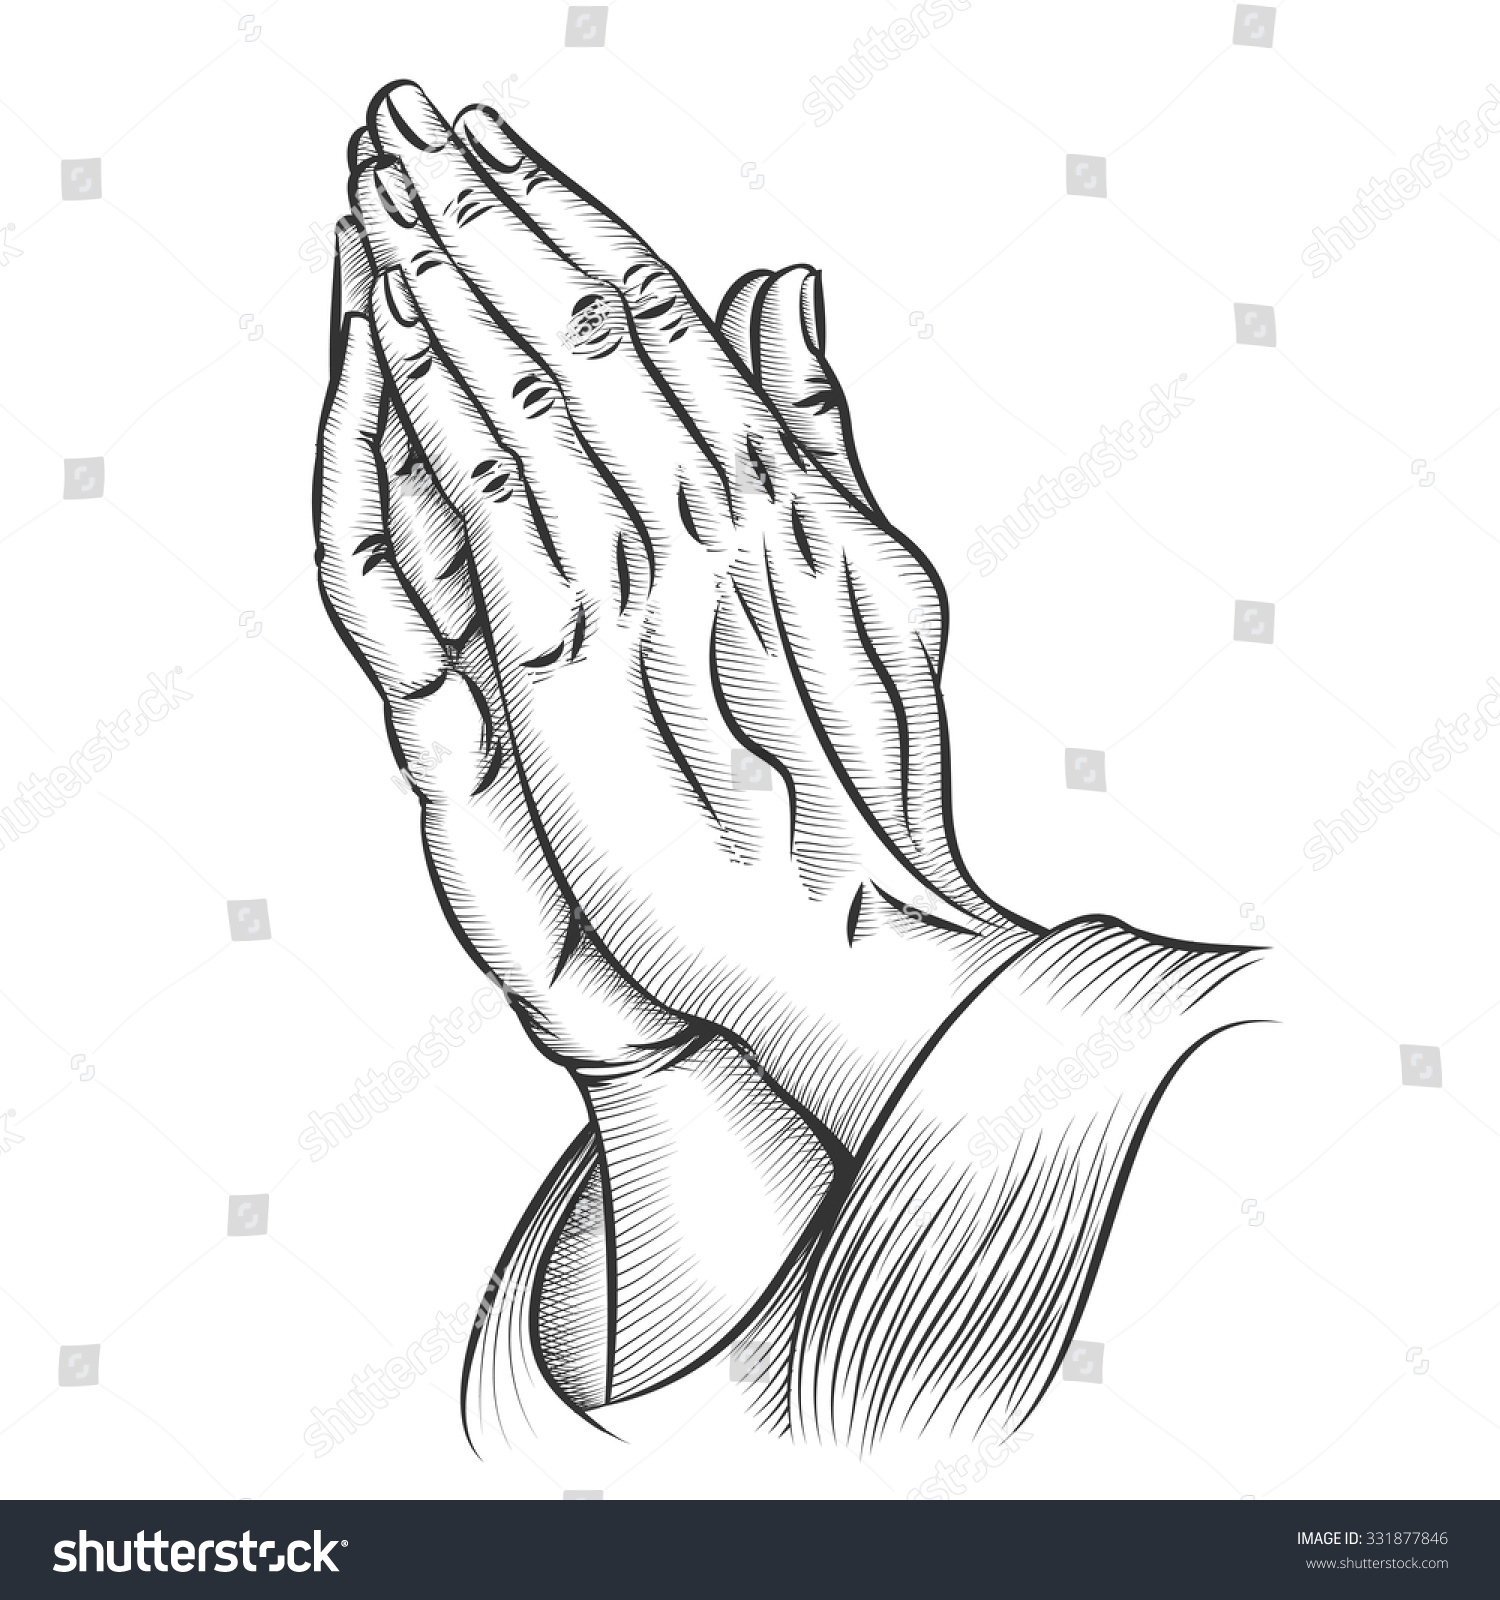 stock-vector-praying-hands-religion-and-